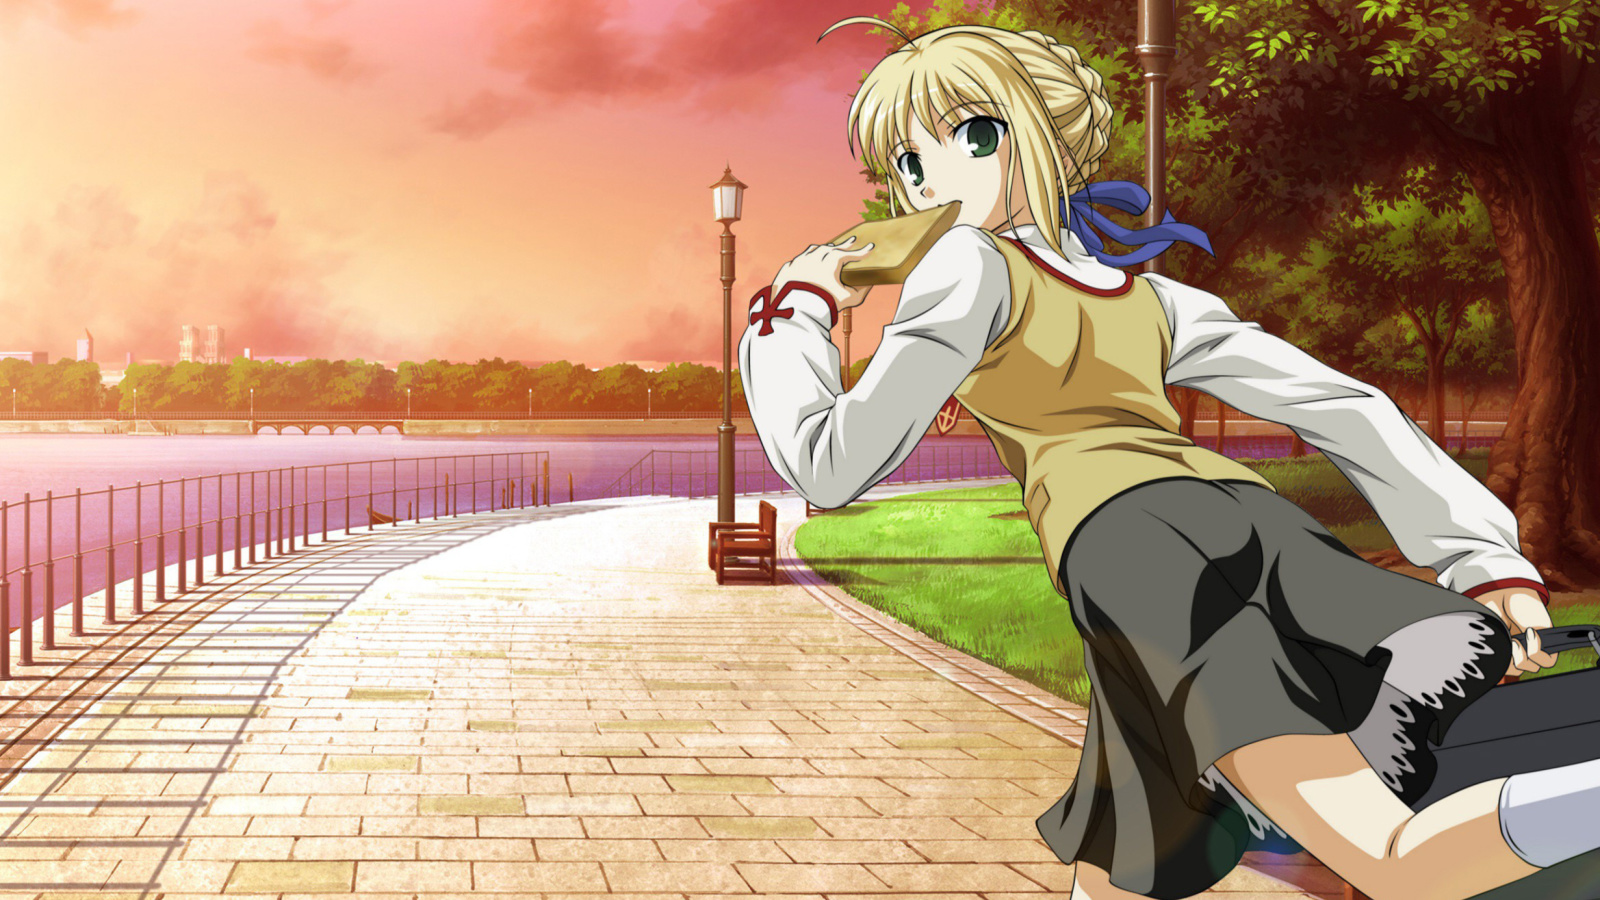 Fate stay night Saber Anime wallpaper 1600x900